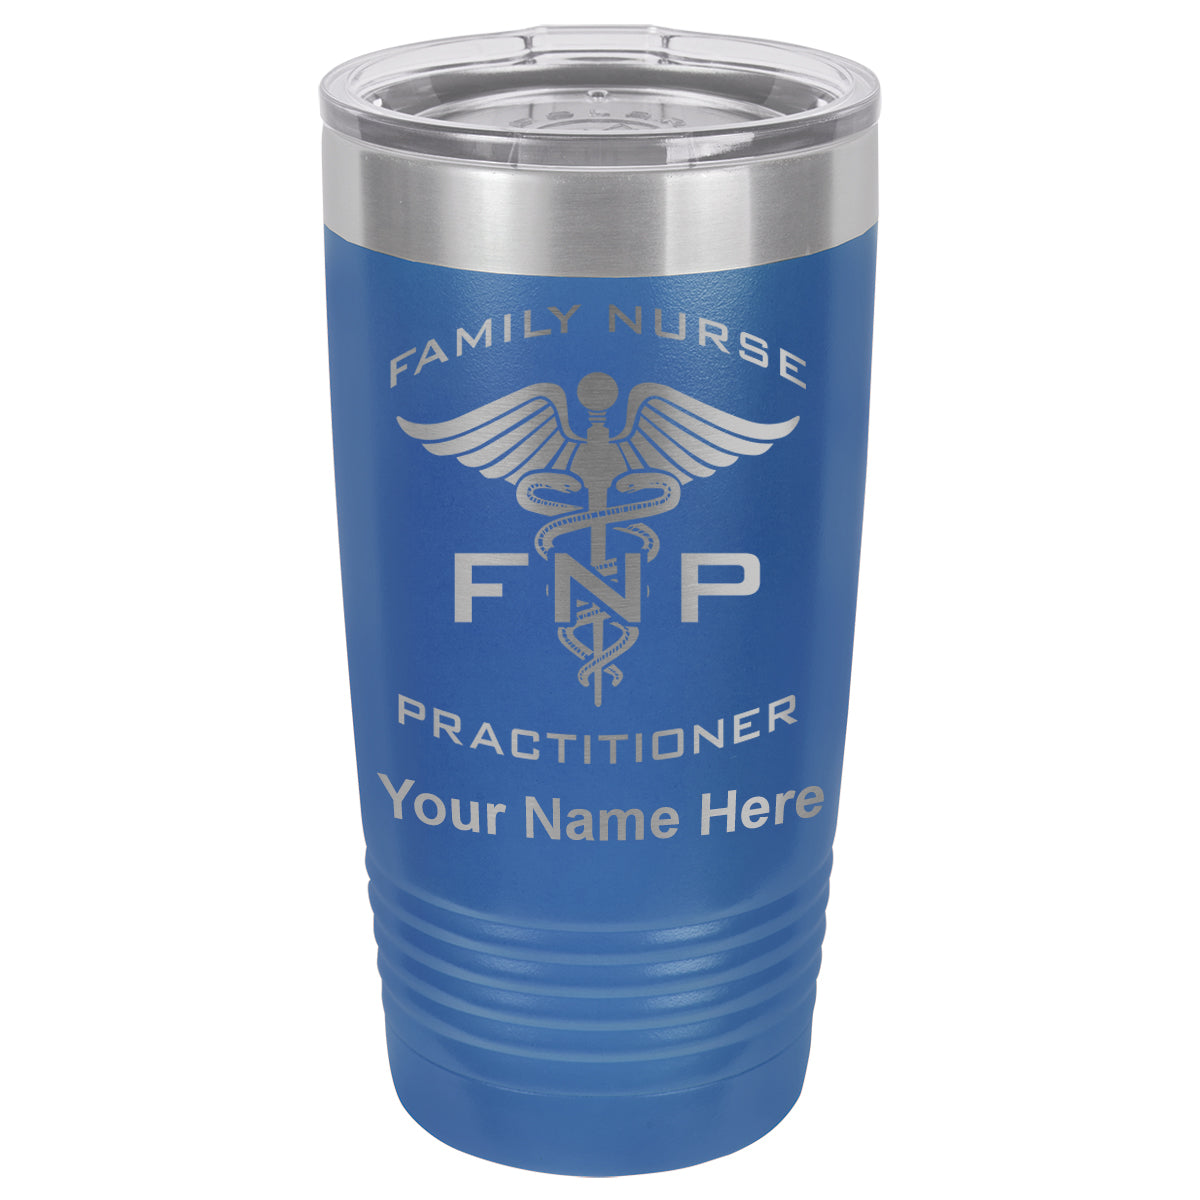 20oz Vacuum Insulated Tumbler Mug, FNP Family Nurse Practitioner, Personalized Engraving Included